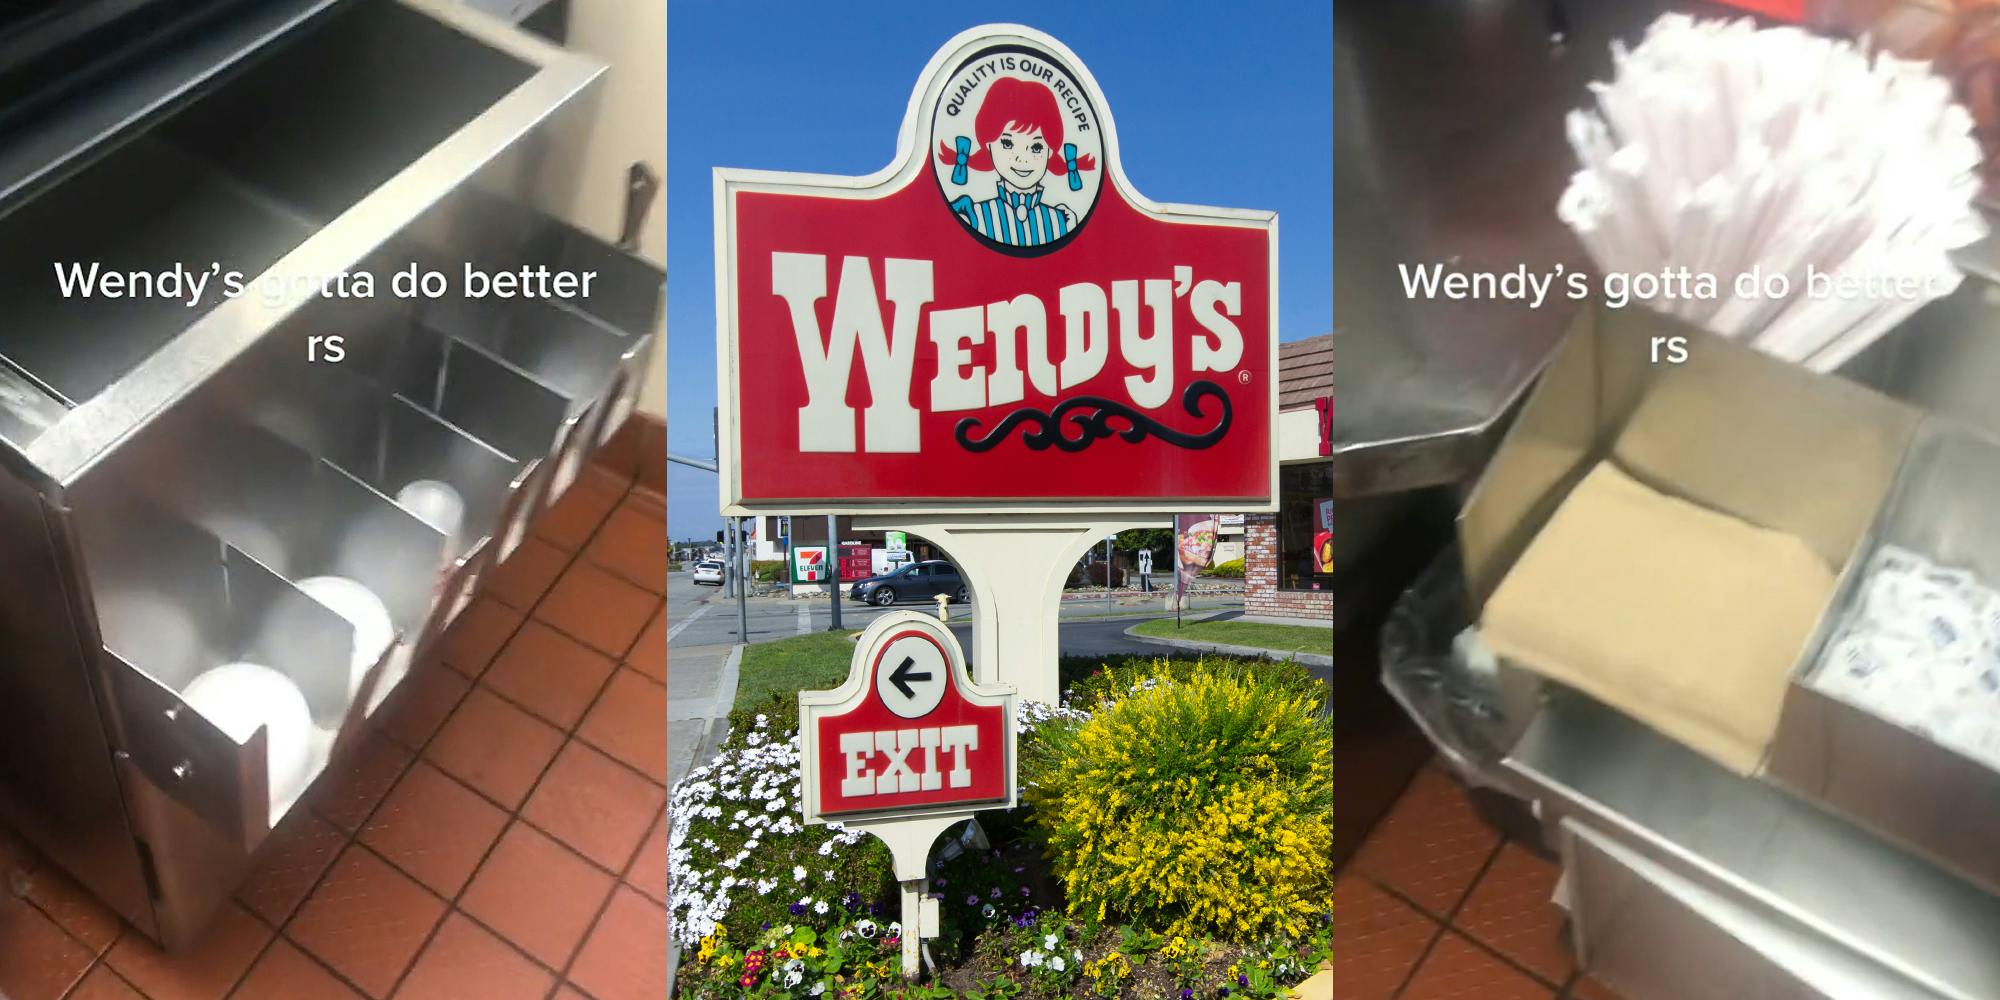 Wendy's ice cube and lid container almost empty with label "Wendy needs to do better RS" (l) Wendy's sign outside (c) Wendy's napkin holder almost empty lettering "Wendy needs to do better RS" (r)